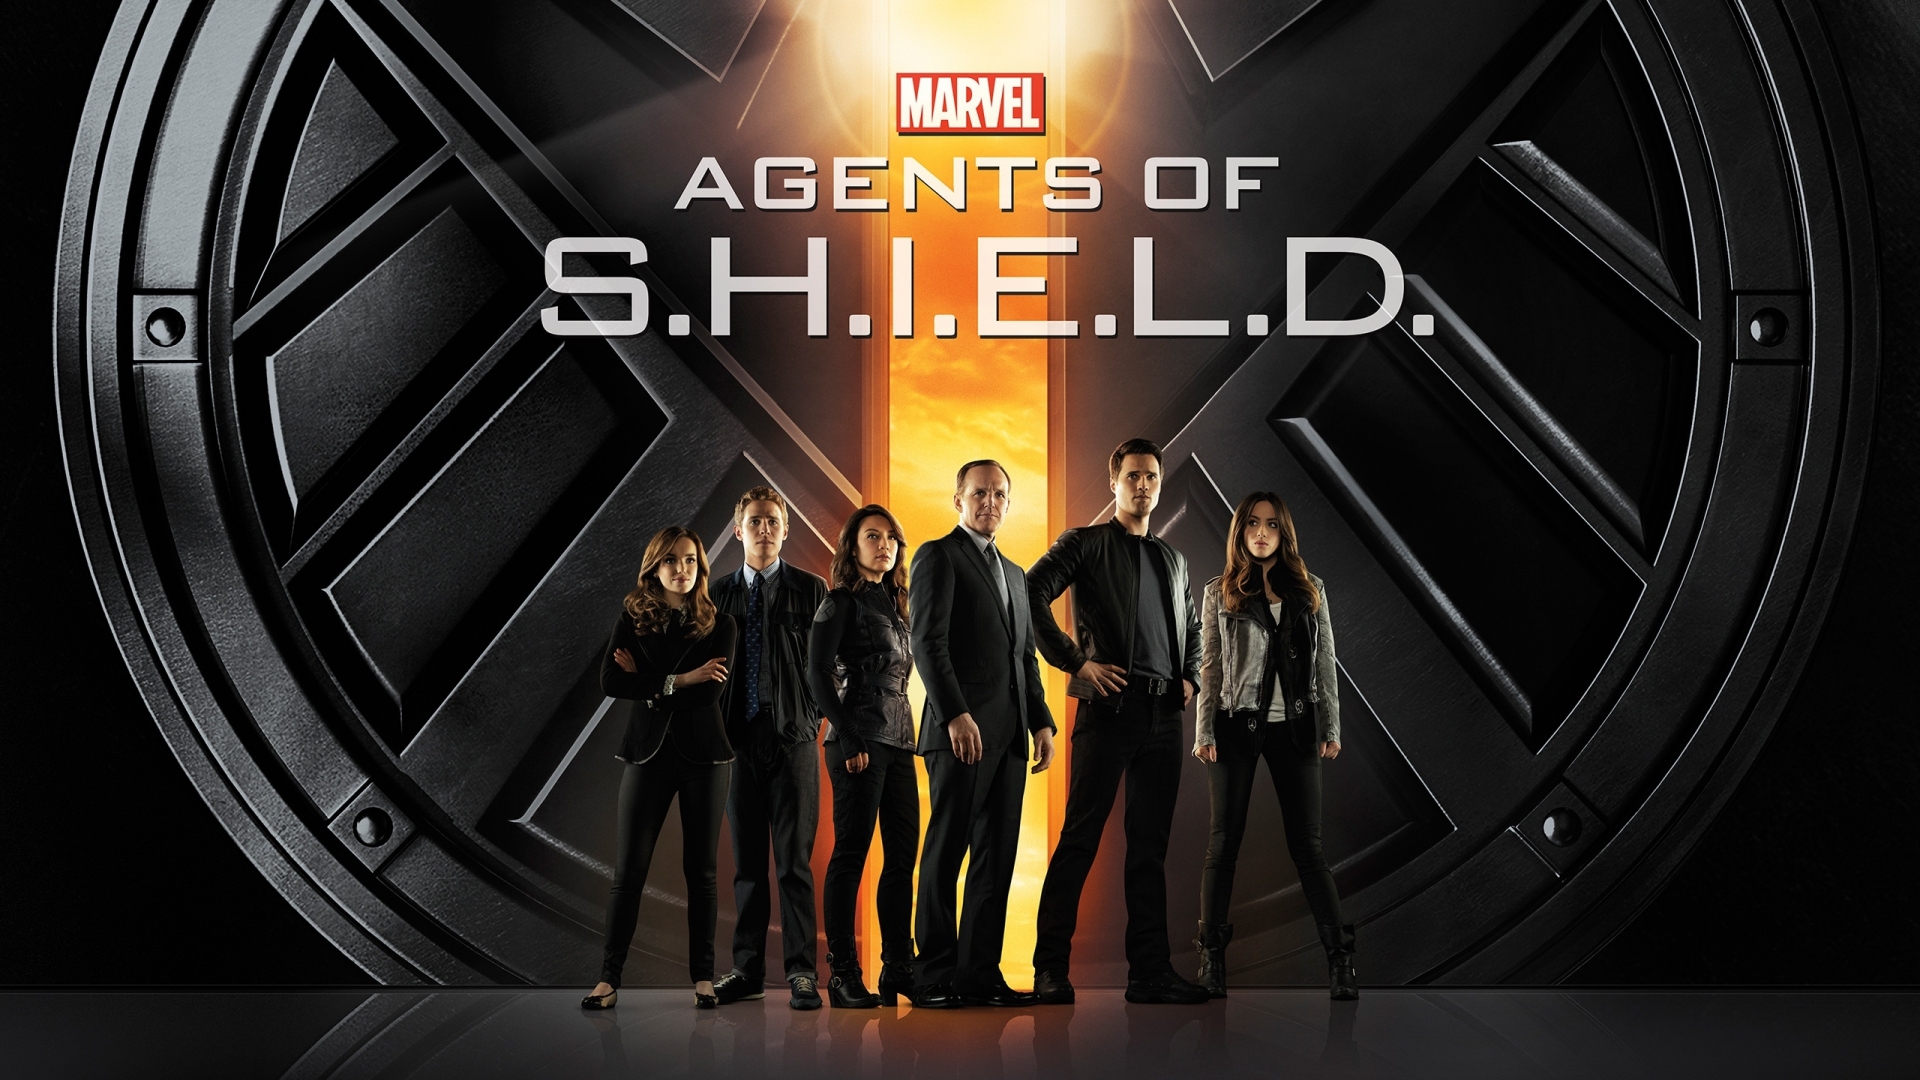 Agents of Shield for 1920 x 1080 HDTV 1080p resolution